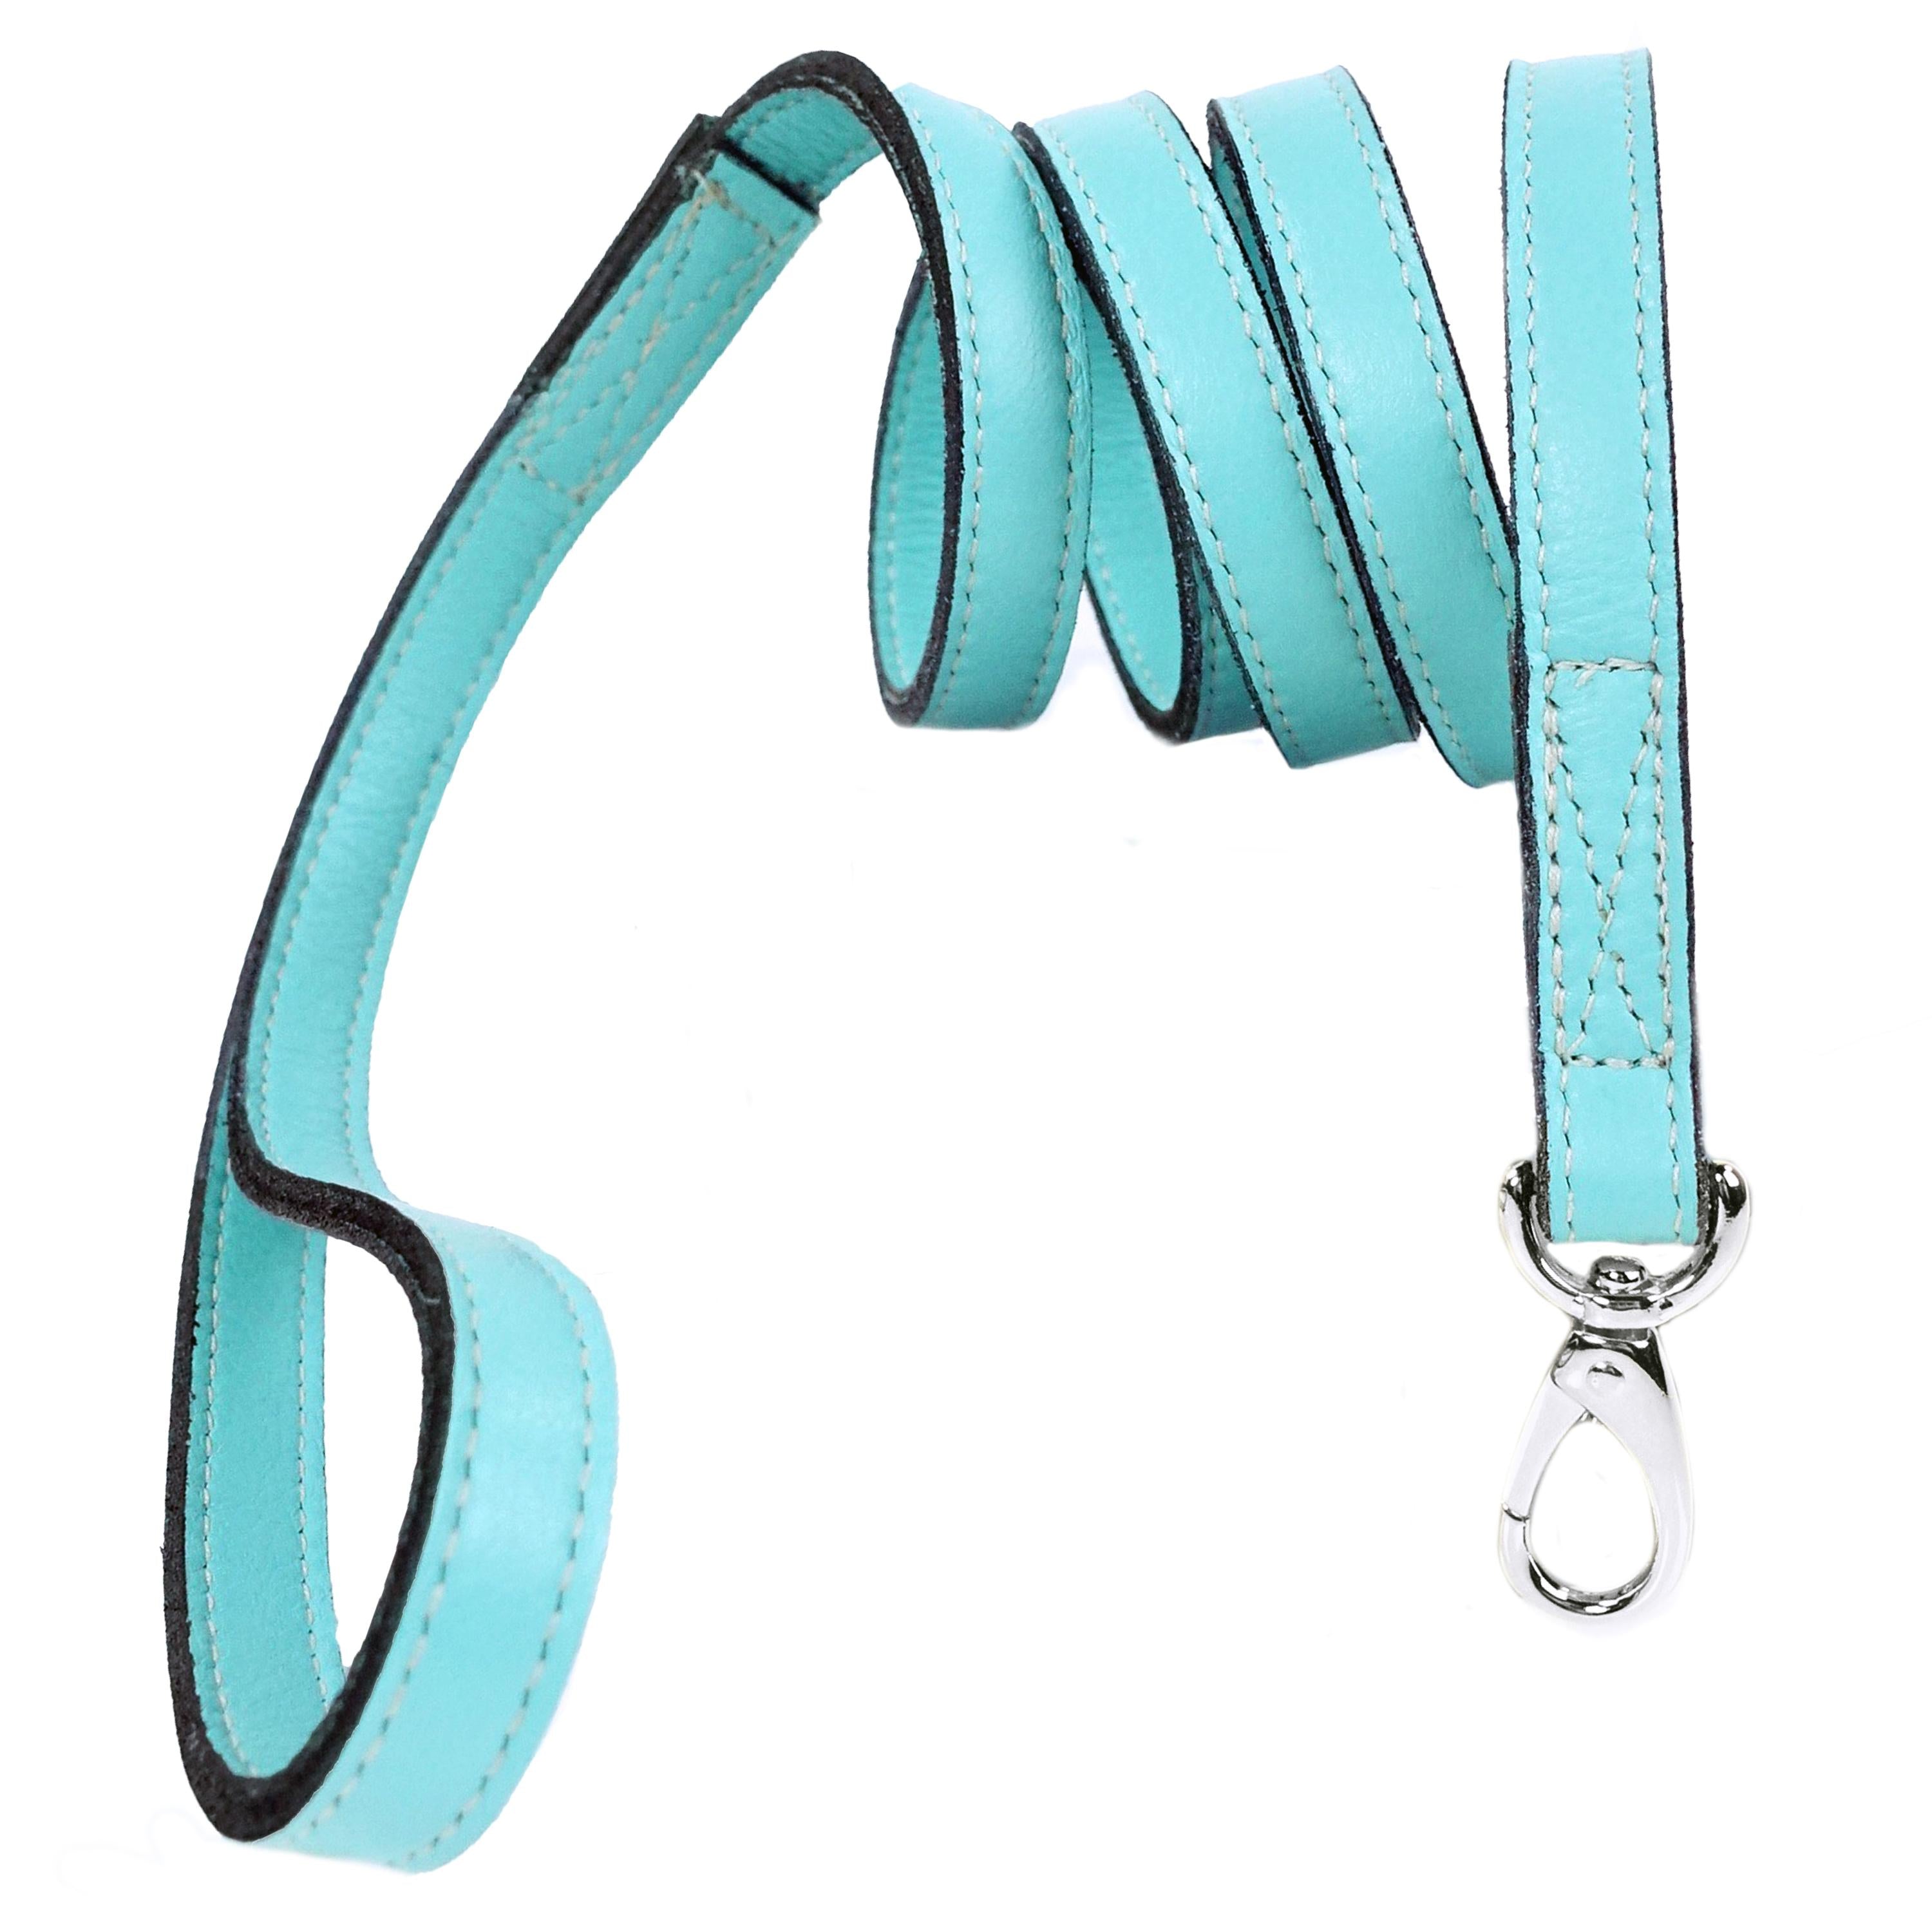 Mayfair Lead in Turquoise